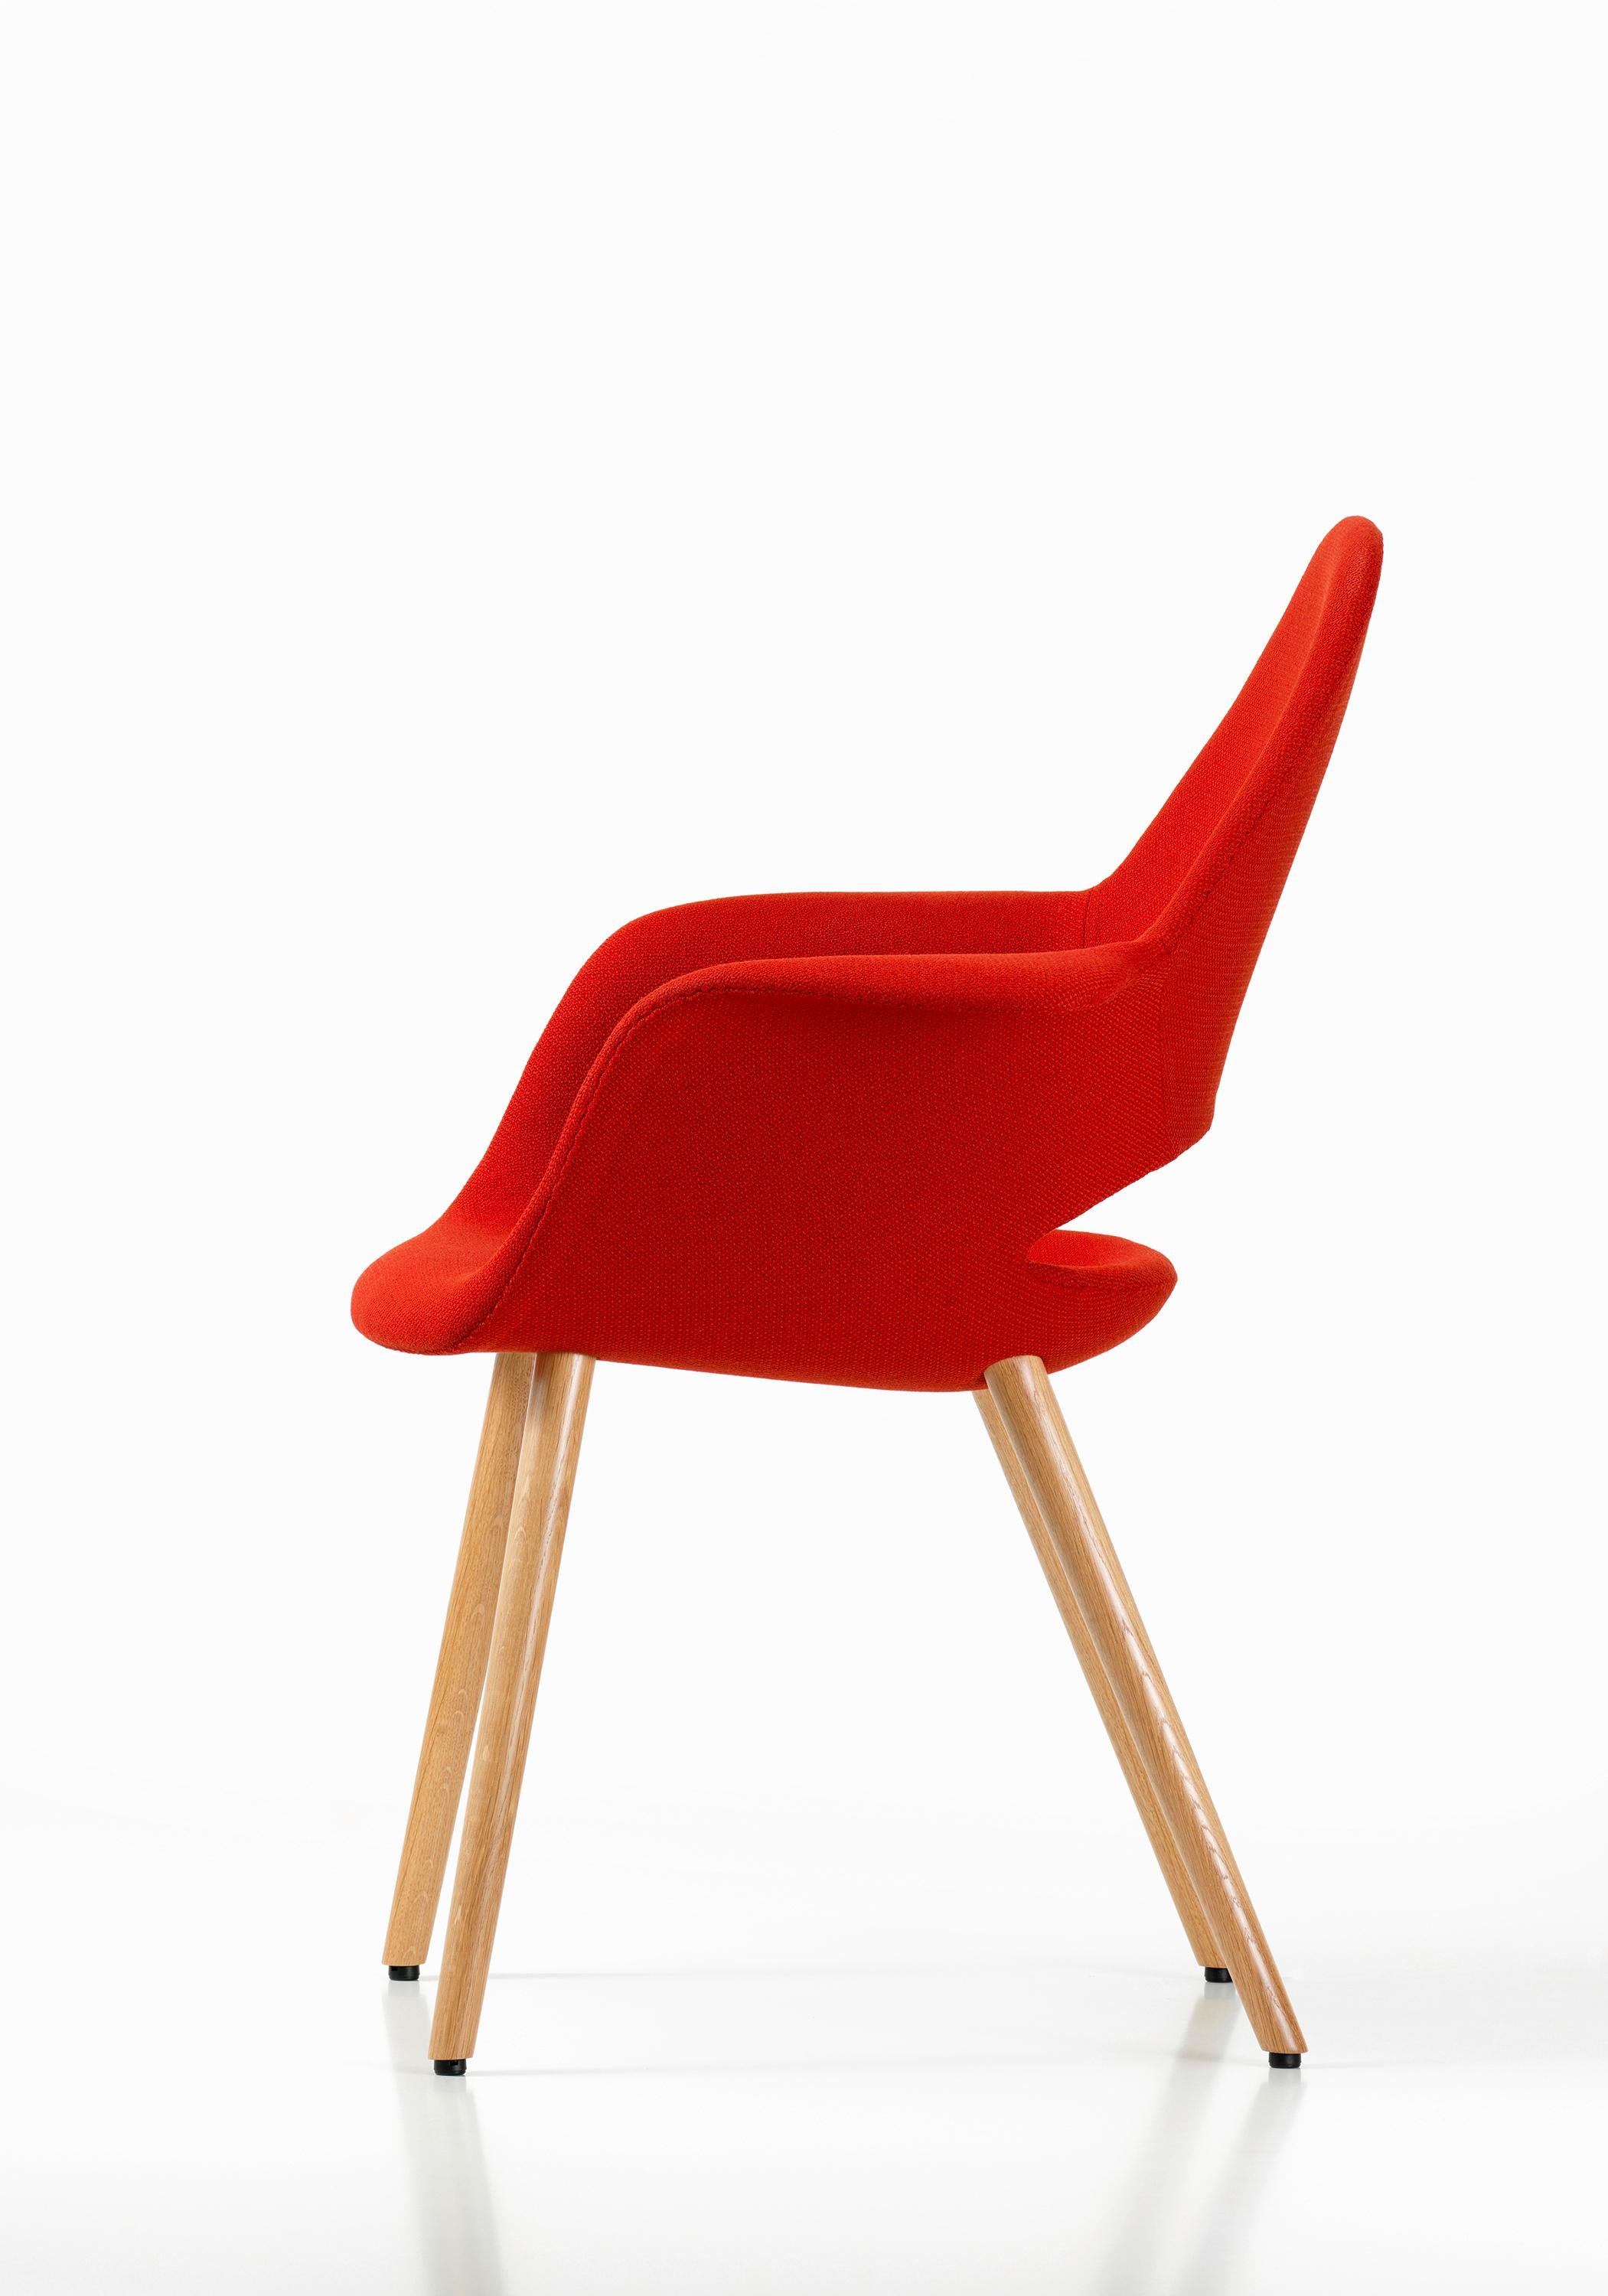 Modern Vitra Organic Conference Chair in Red Chilli by Charles Eames & Eero Saarinen For Sale